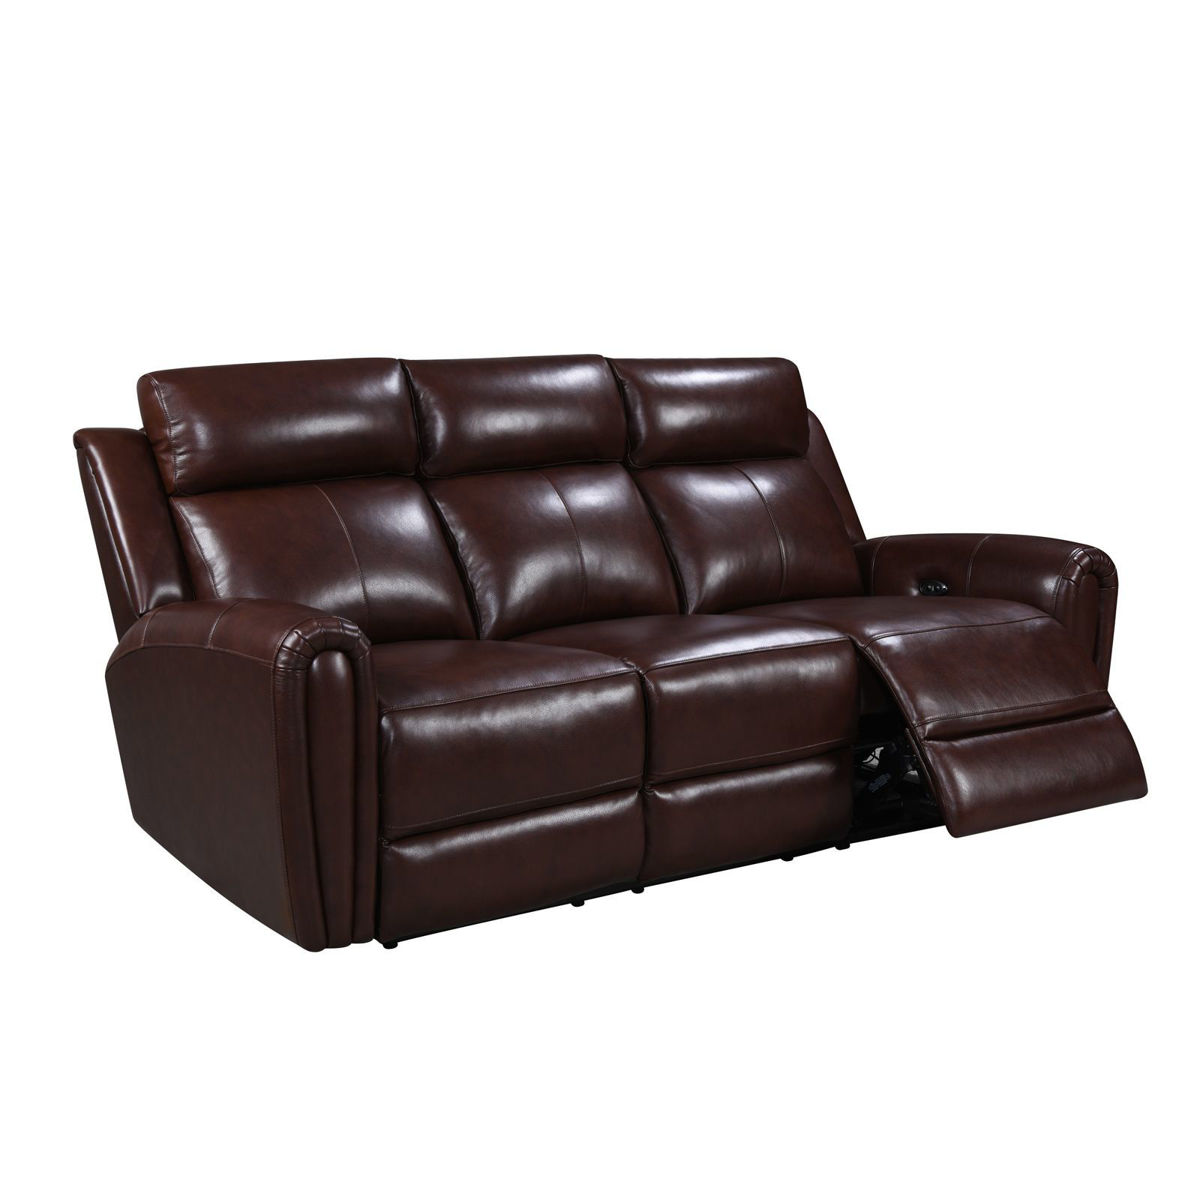 Picture of Jonathan Brown Leather Power Recliner Sofa